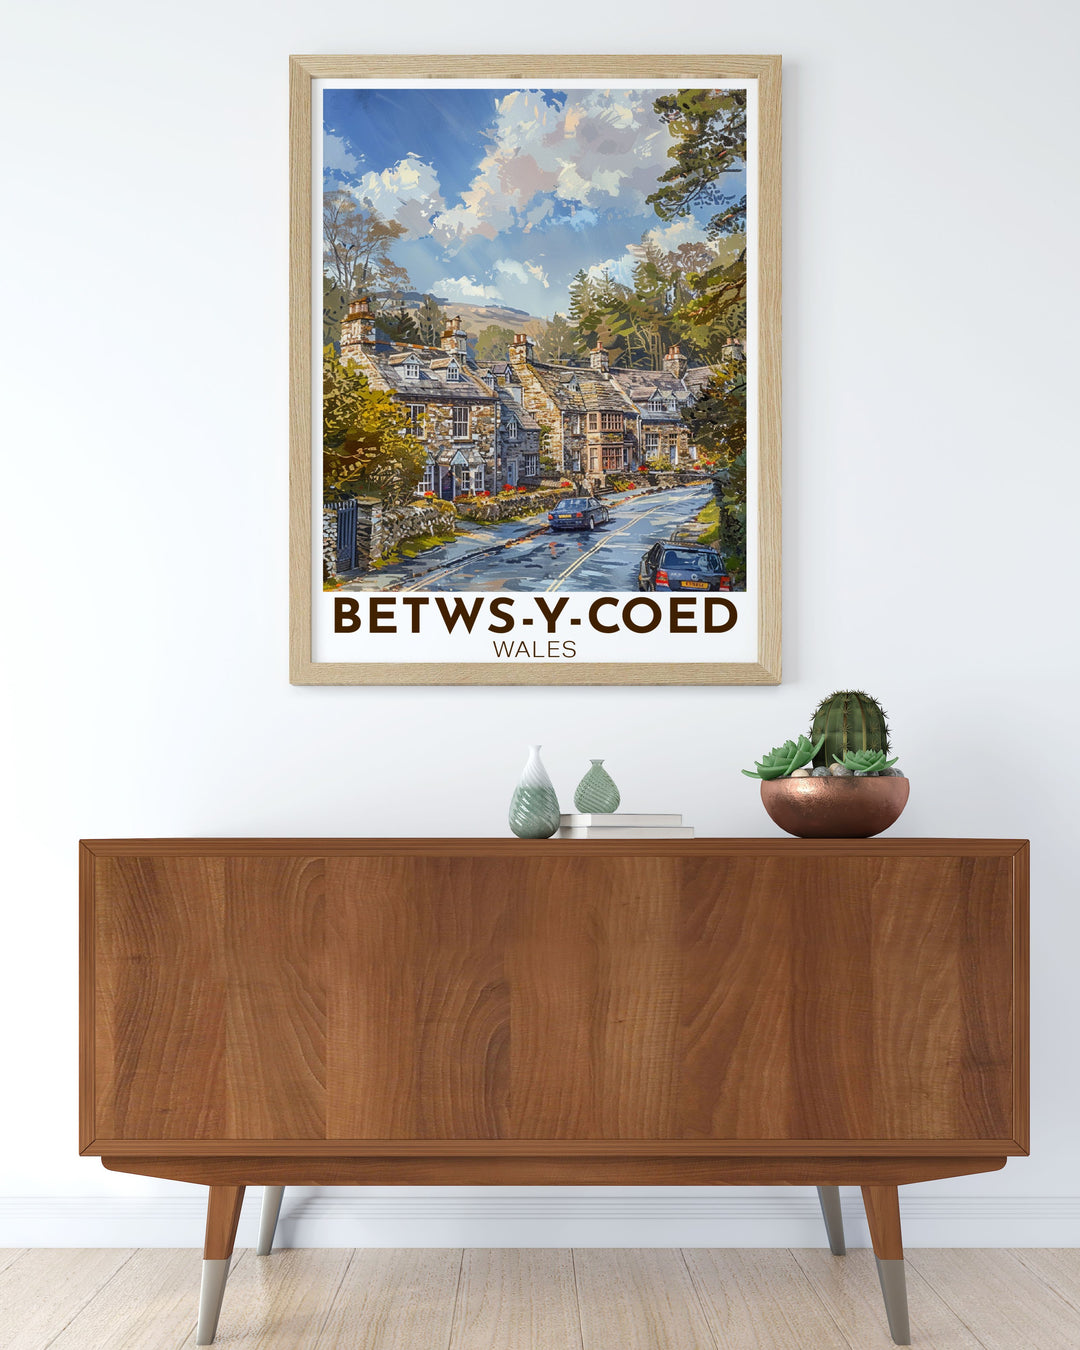 Stunning Betws y Coed wall art showcasing the enchanting beauty of this Welsh village ideal for adding cultural significance and visual appeal to your home decor or as a thoughtful present.